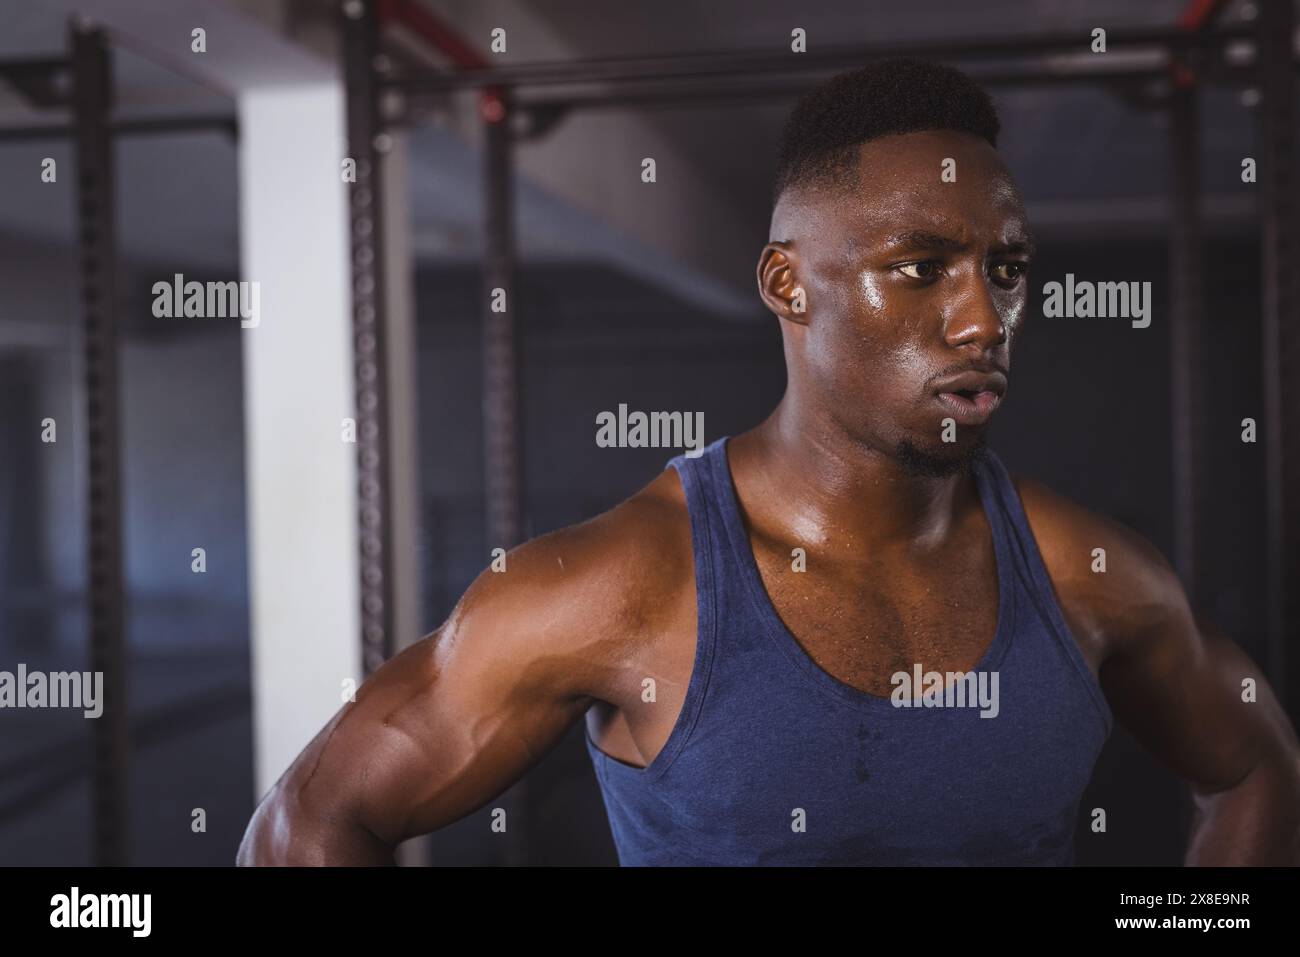 Strong and fit African American man in his mid-twenties working out at gym. He is standing in front of gym equipment, sweating and focused on his exer Stock Photo